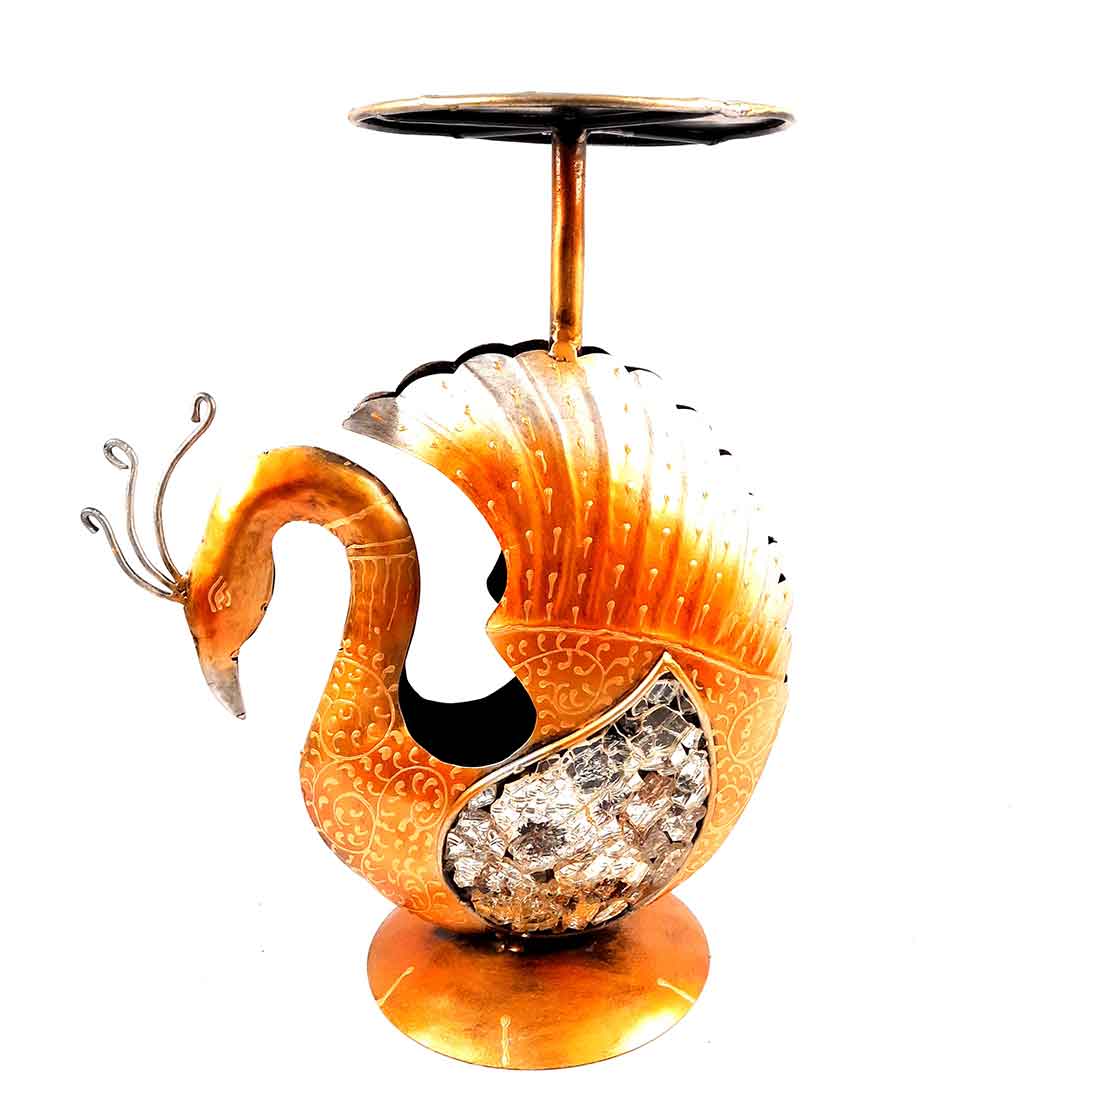 Antique Side Table Swan Design - 15 Inch for Home and Corner Decor - ApkaMartSide Table Peacock Design | End Table Cum Showpiece - for Living Room, Home and Corner Decor & Gift - 15 Inch - apkamart #Color_Brown